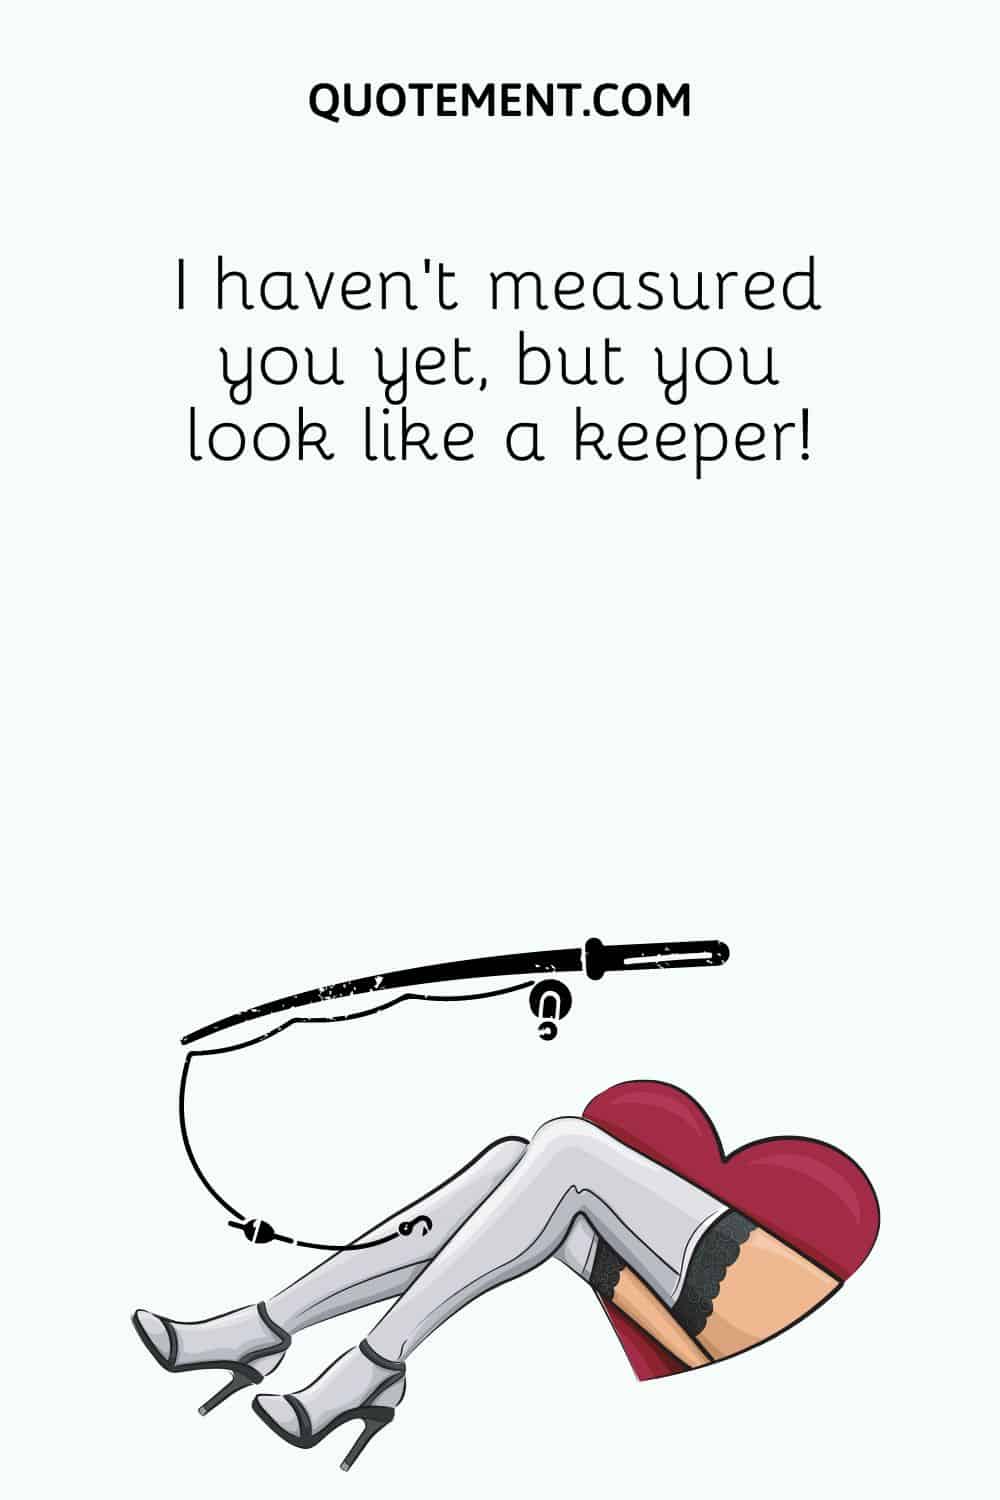 I haven’t measured you yet, but you look like a keeper